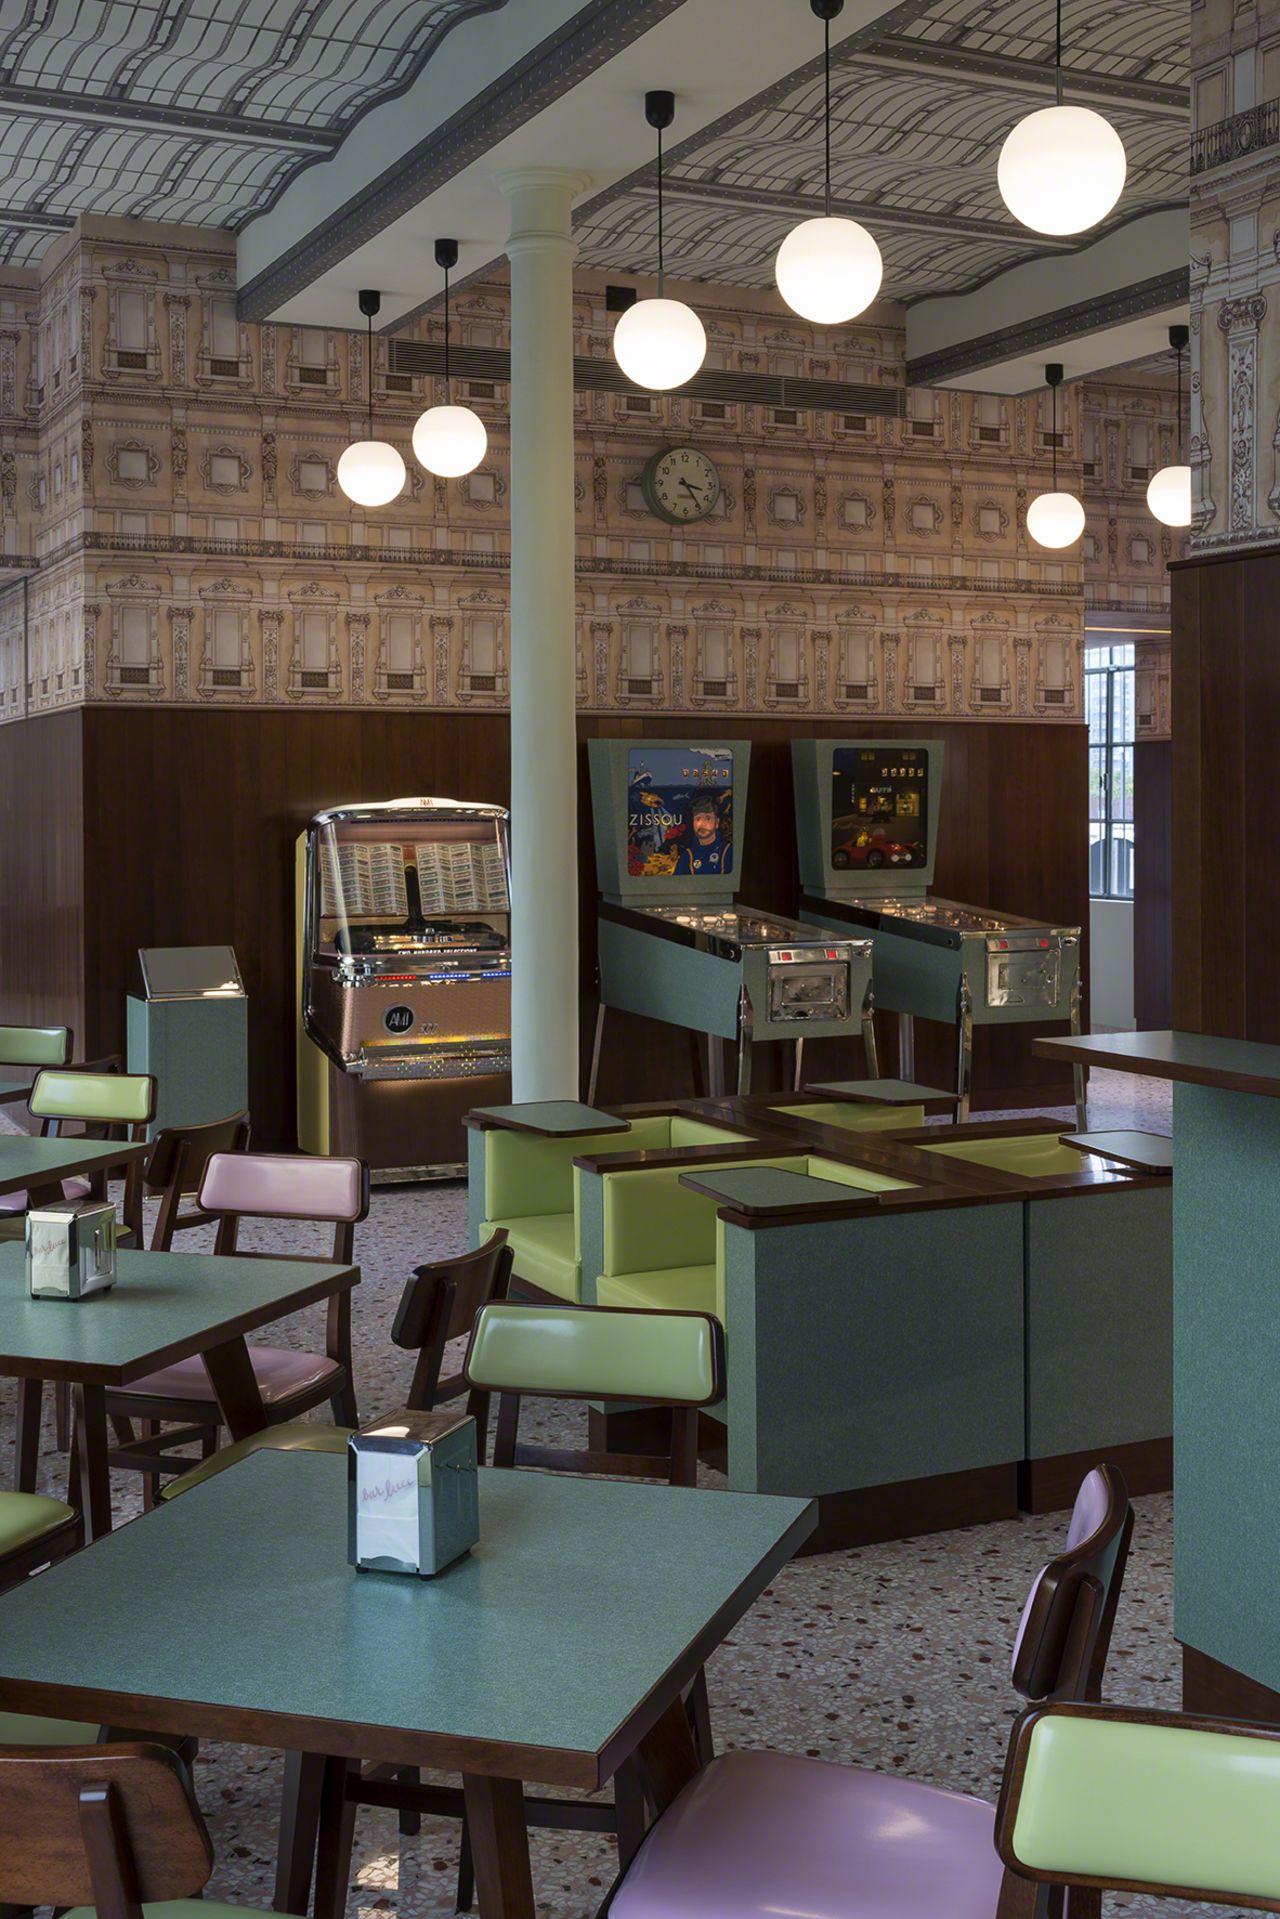 Welcome to Bar Luce, a Milan bar designed by director Wes Anderson.